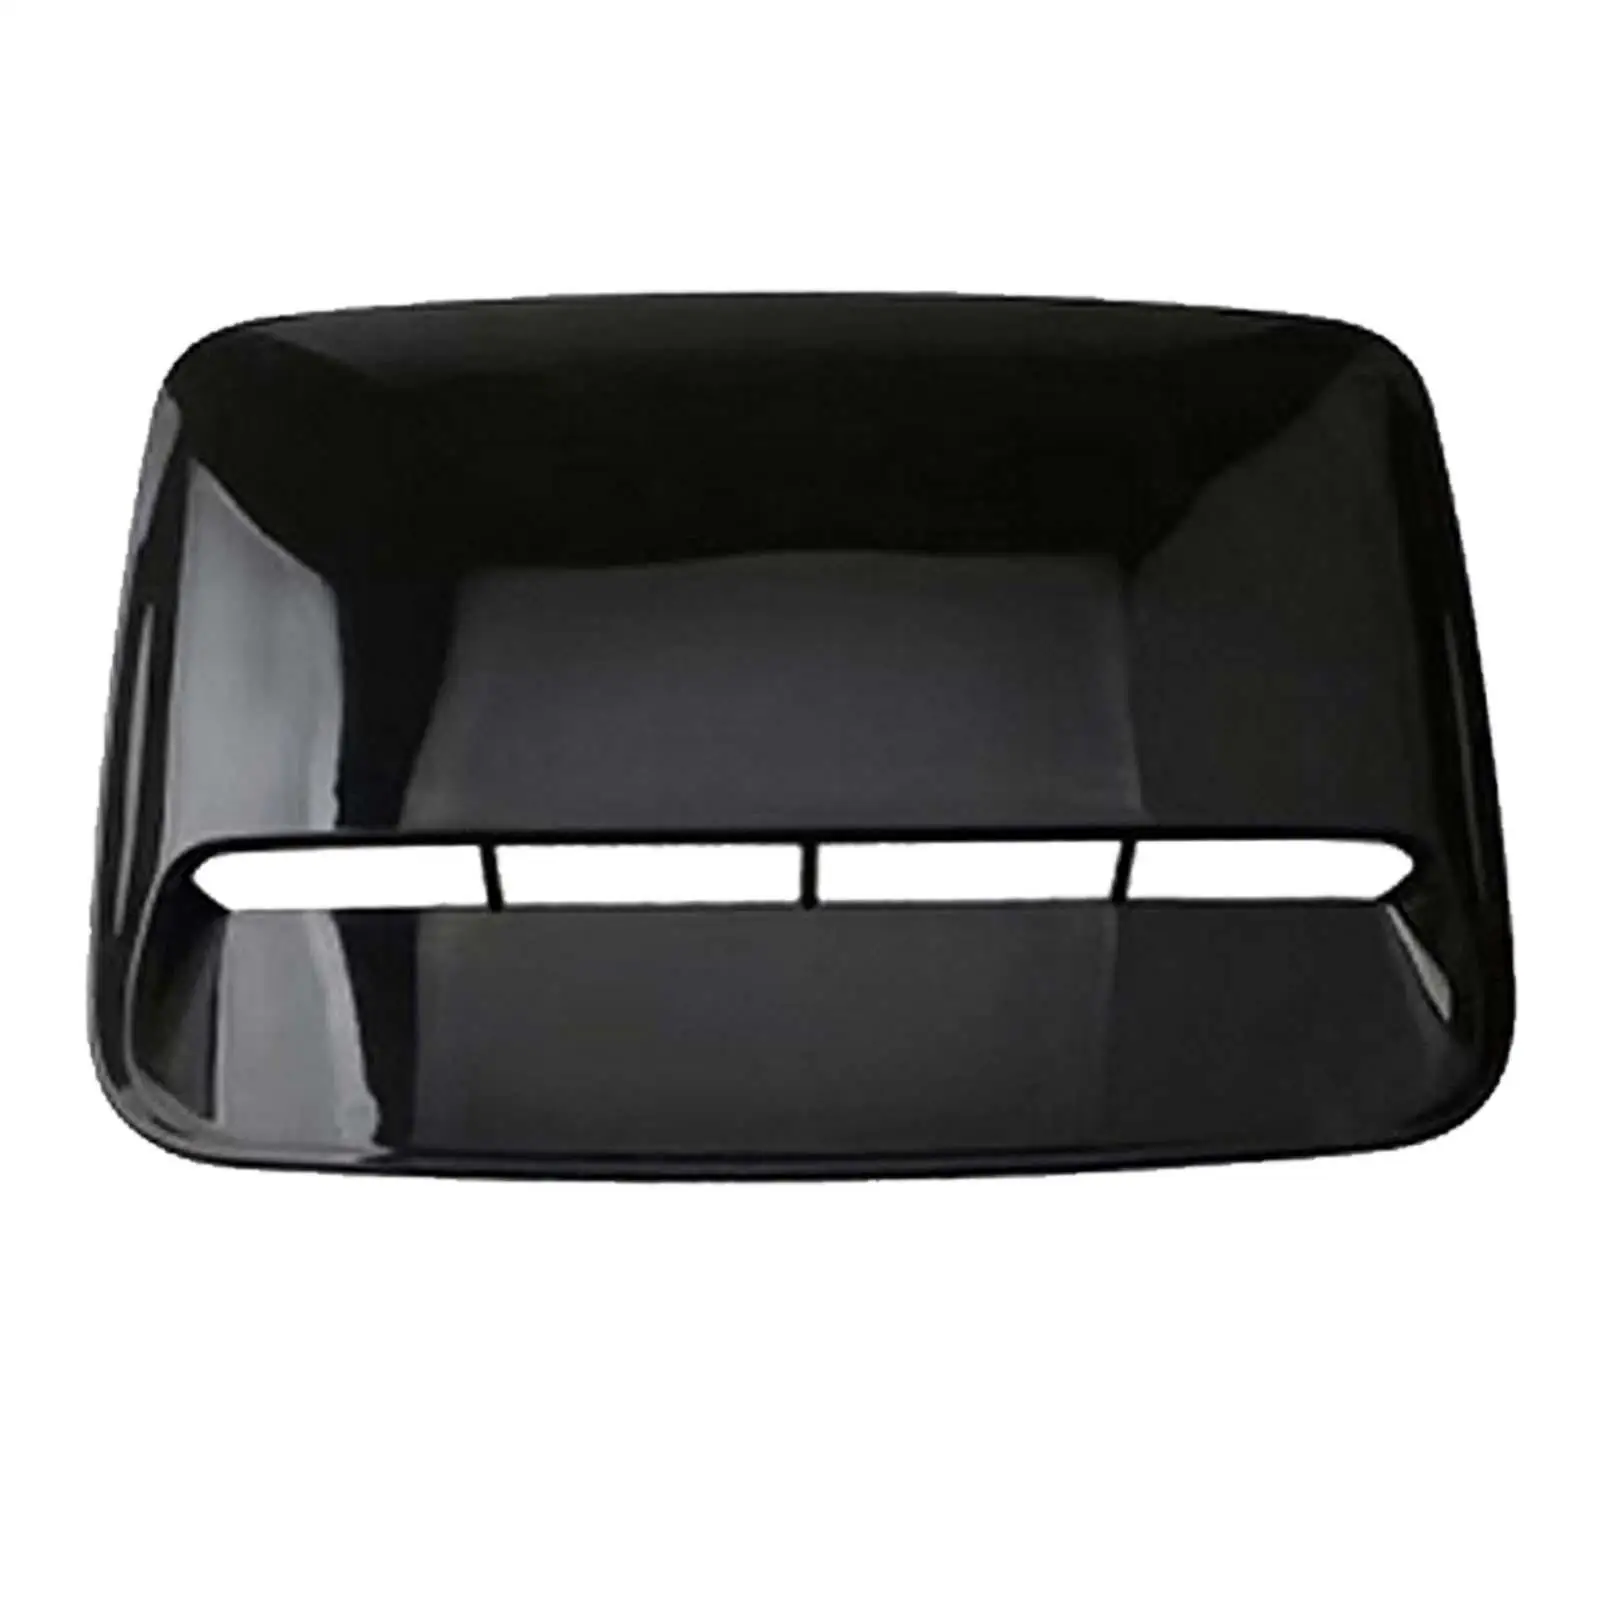 Hood Scoop Vent Cover Car Hood Vent for Automobile Modification Quality